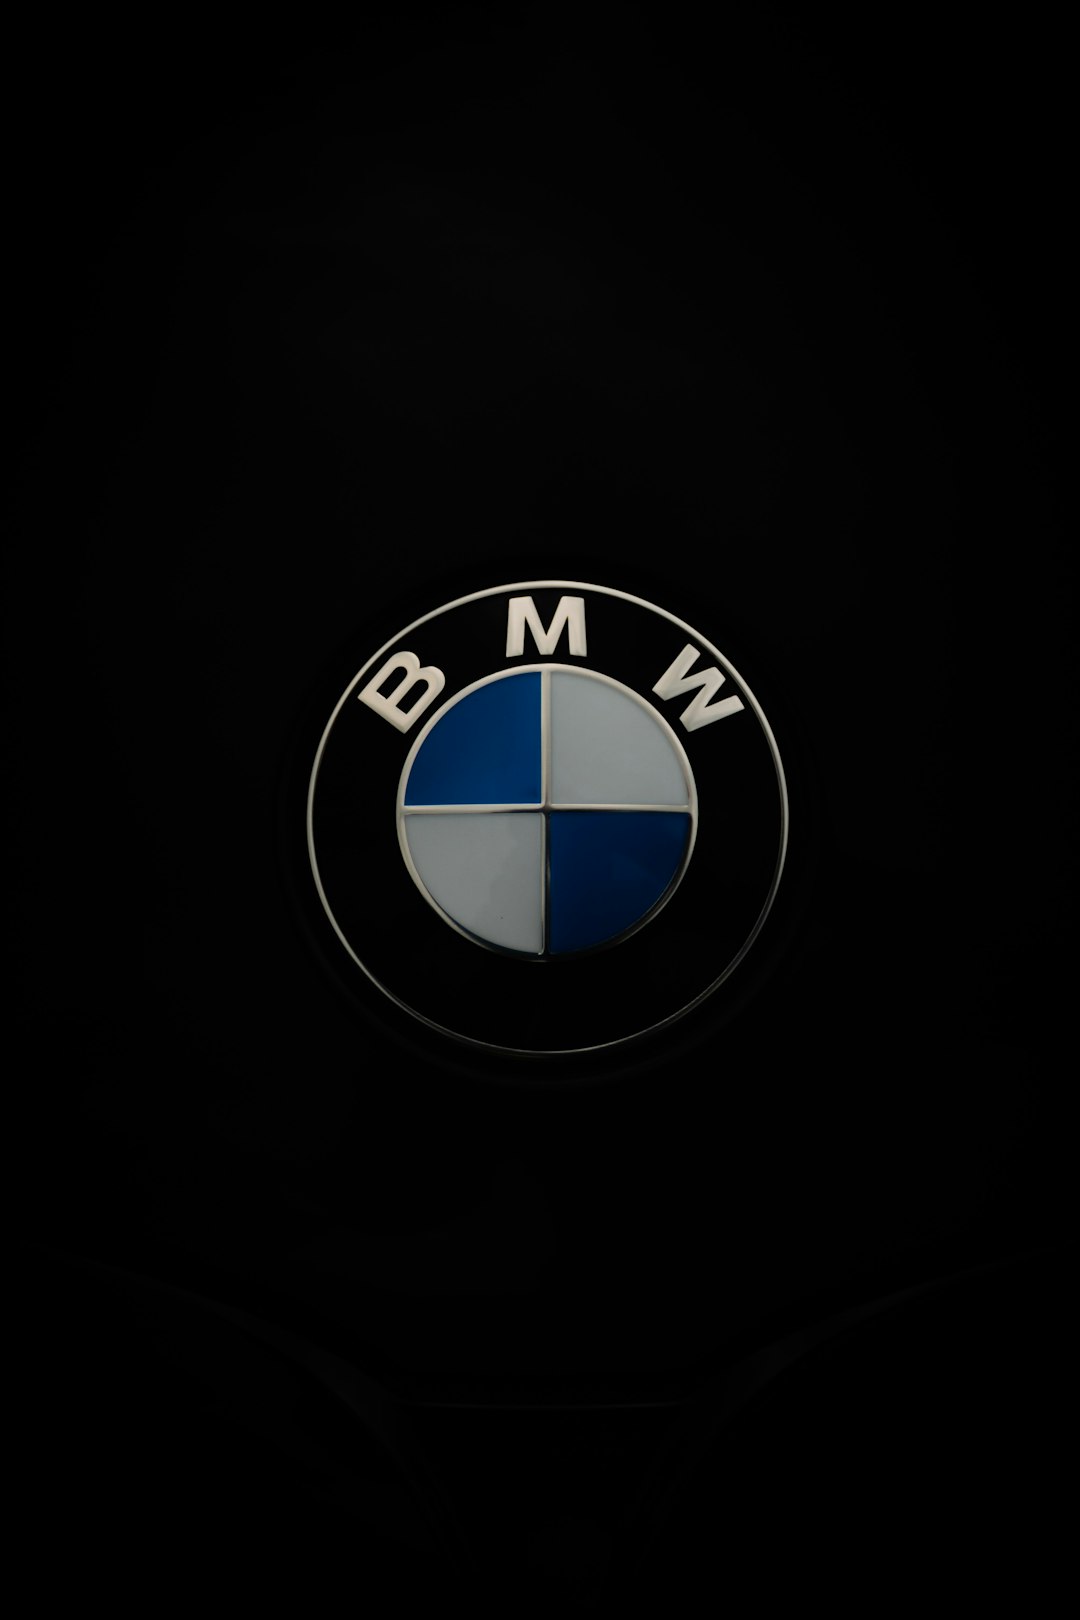 The BMW M4 is a high-performance sports car known for its powerful engine and agile handling.